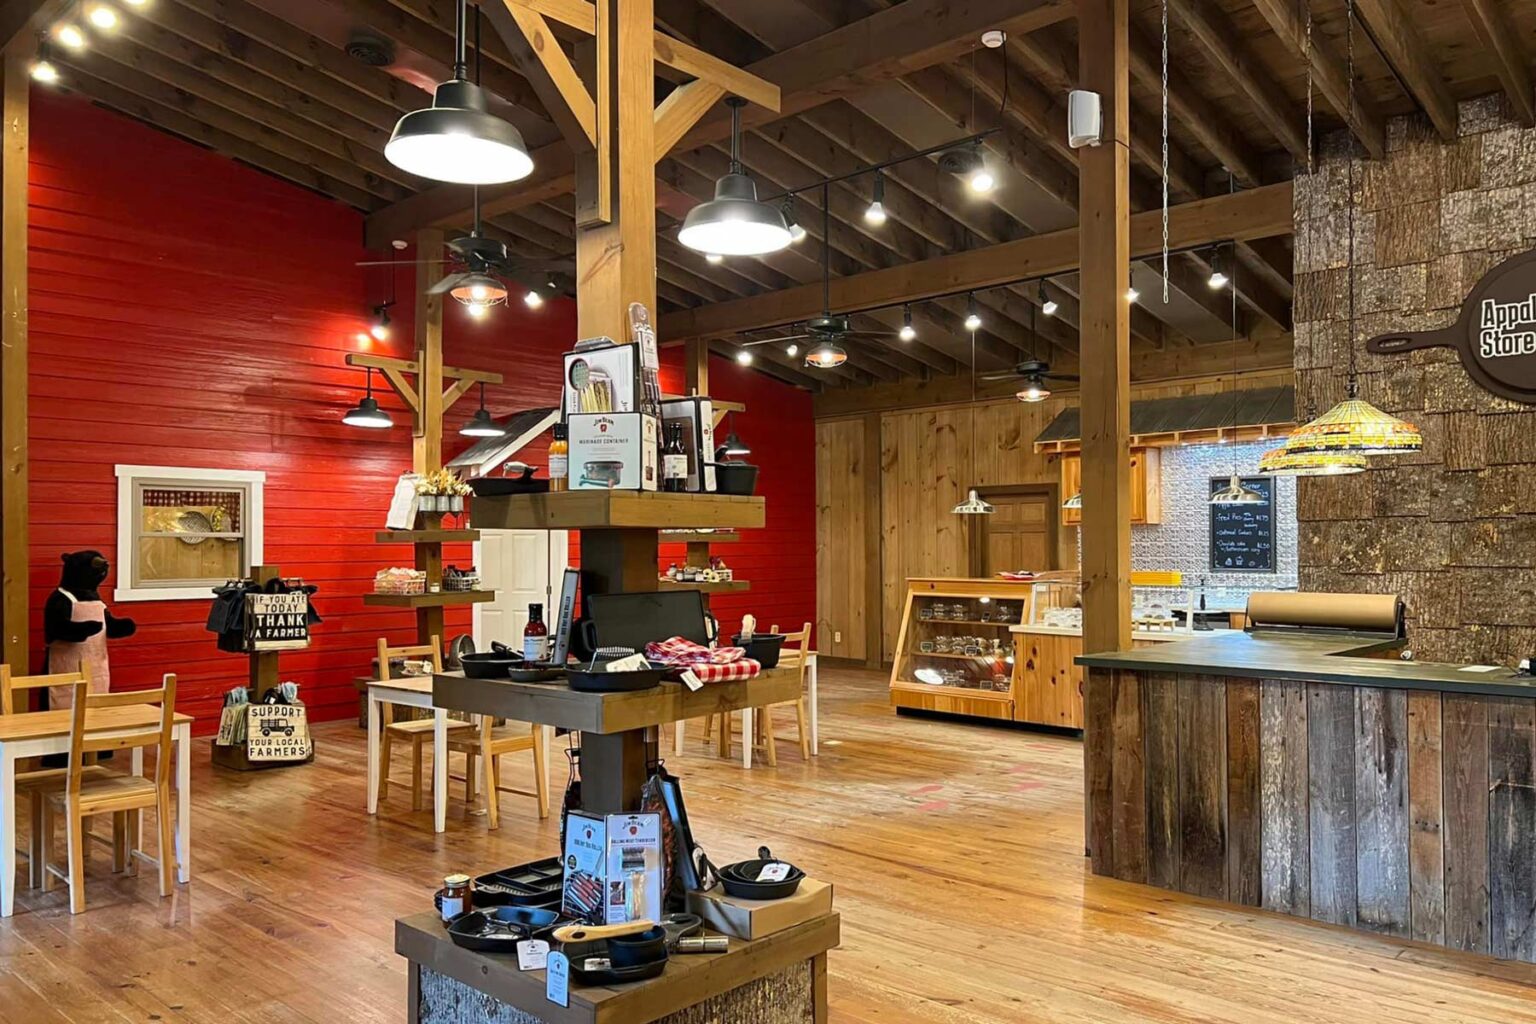 Smoky Mountain School of Cooking, Appalachian Store, and Cafe interior..